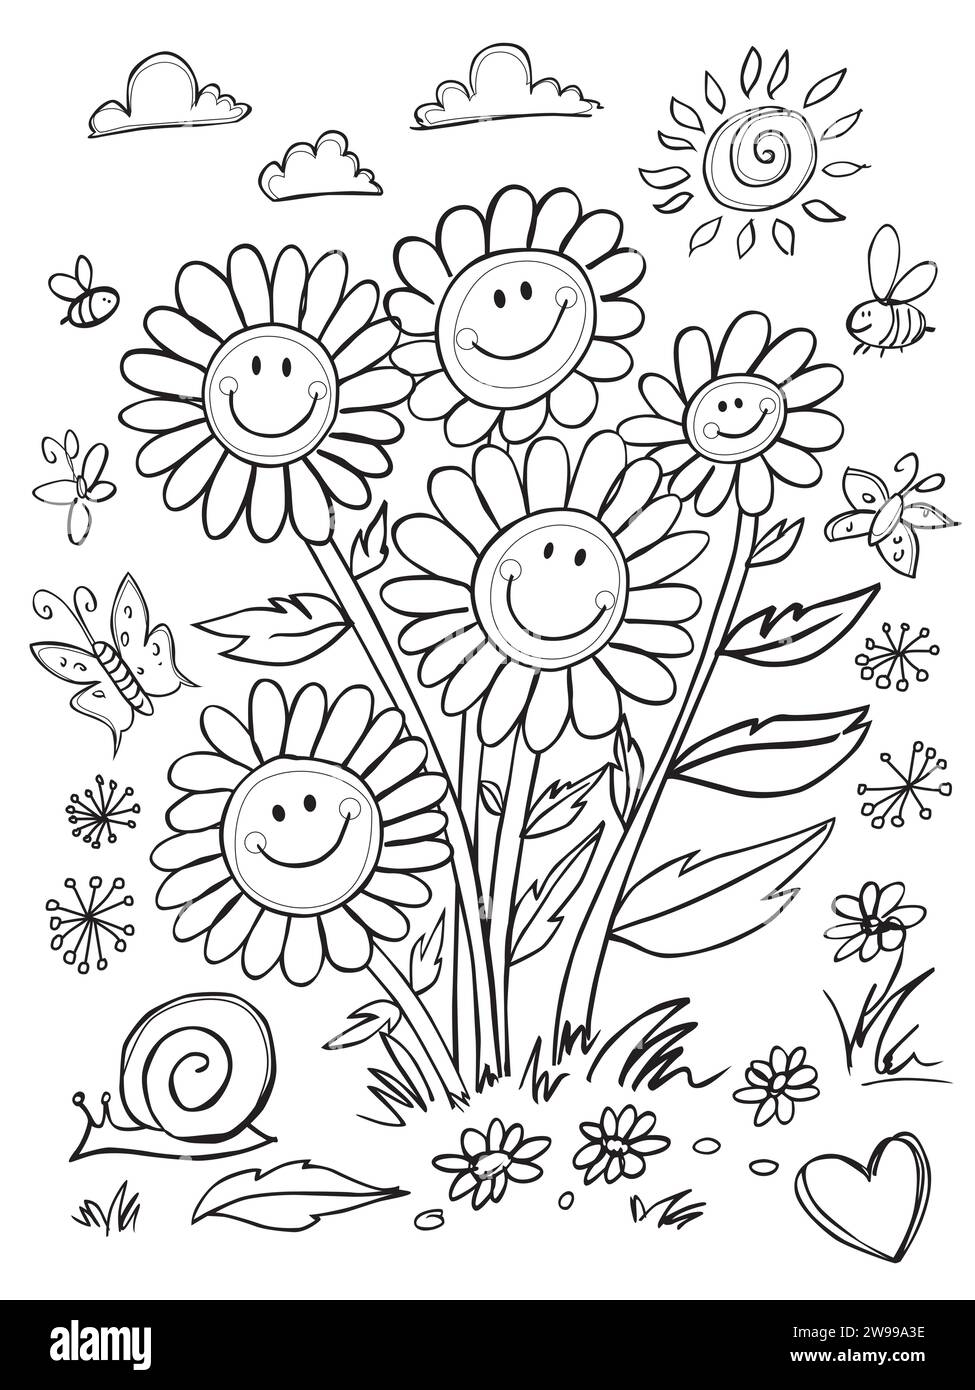 Vector cute black and white outlines happy daisy portrait with snail and butterflies illustration. Great colouring activity for kids. Stock Vector